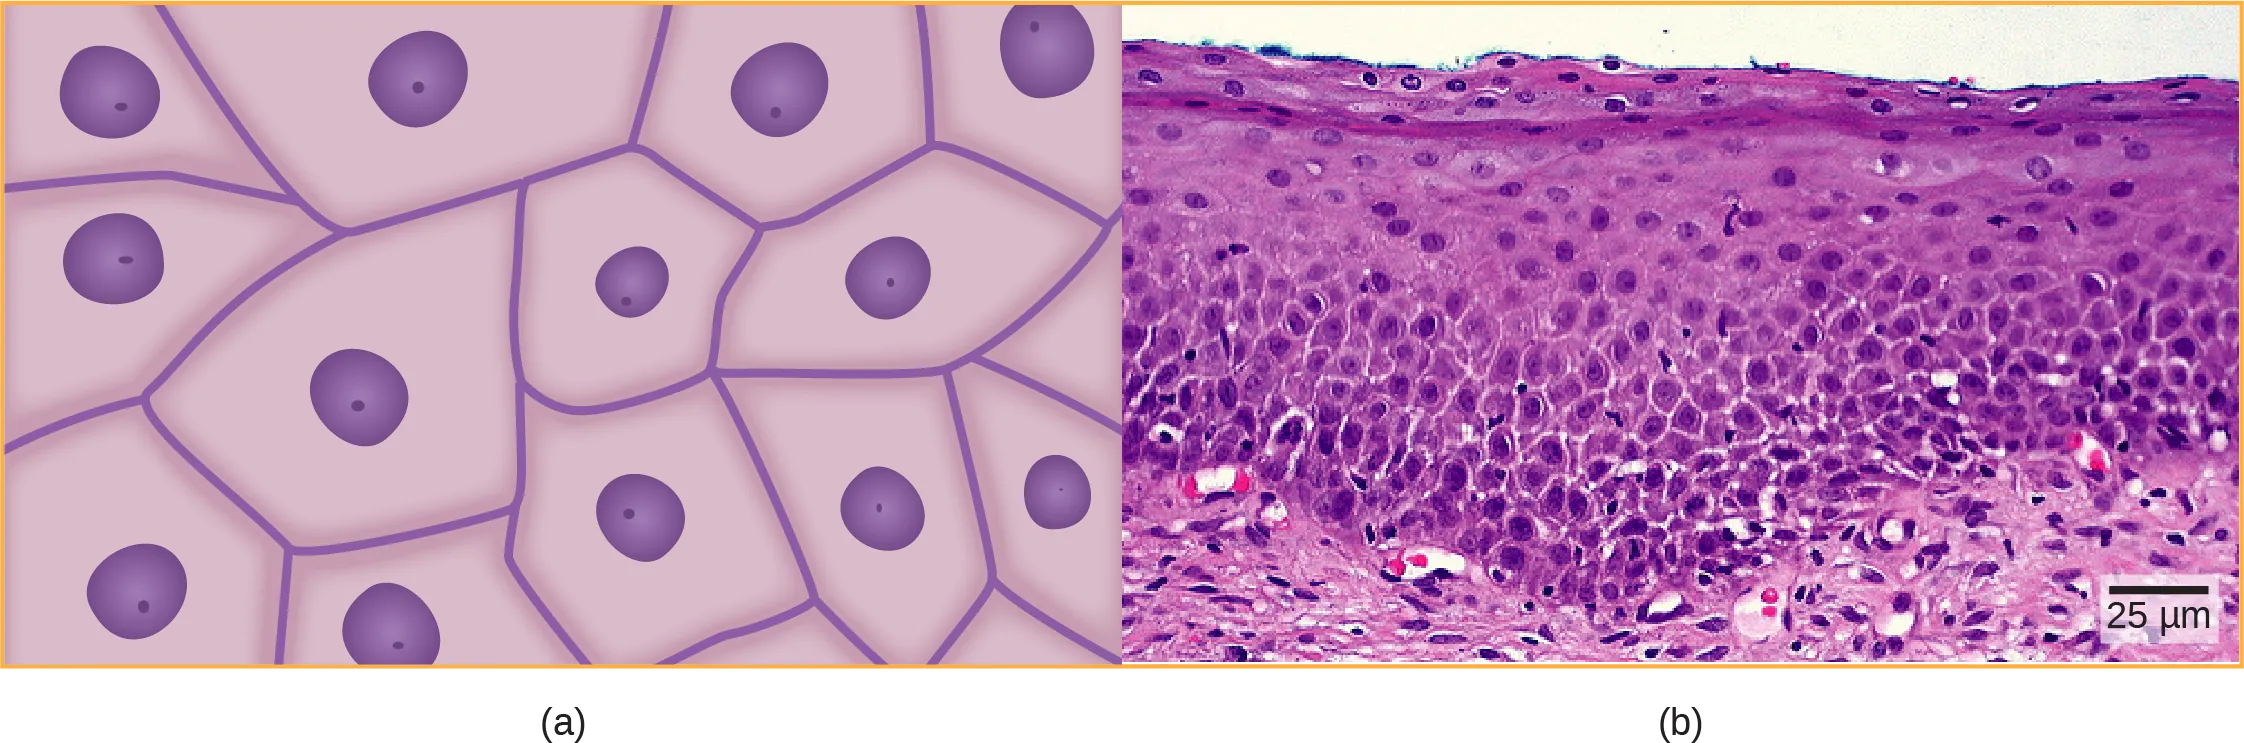 Illustration A shows irregularly shaped cells with a central nucleus. Micrograph B shows a cross section of squamous cells from the human cervix. In the upper layer the cells appear to be tightly packed. In they middle layer they appear to be more loosely packed, and in the lower layer they are flatter and elongated.